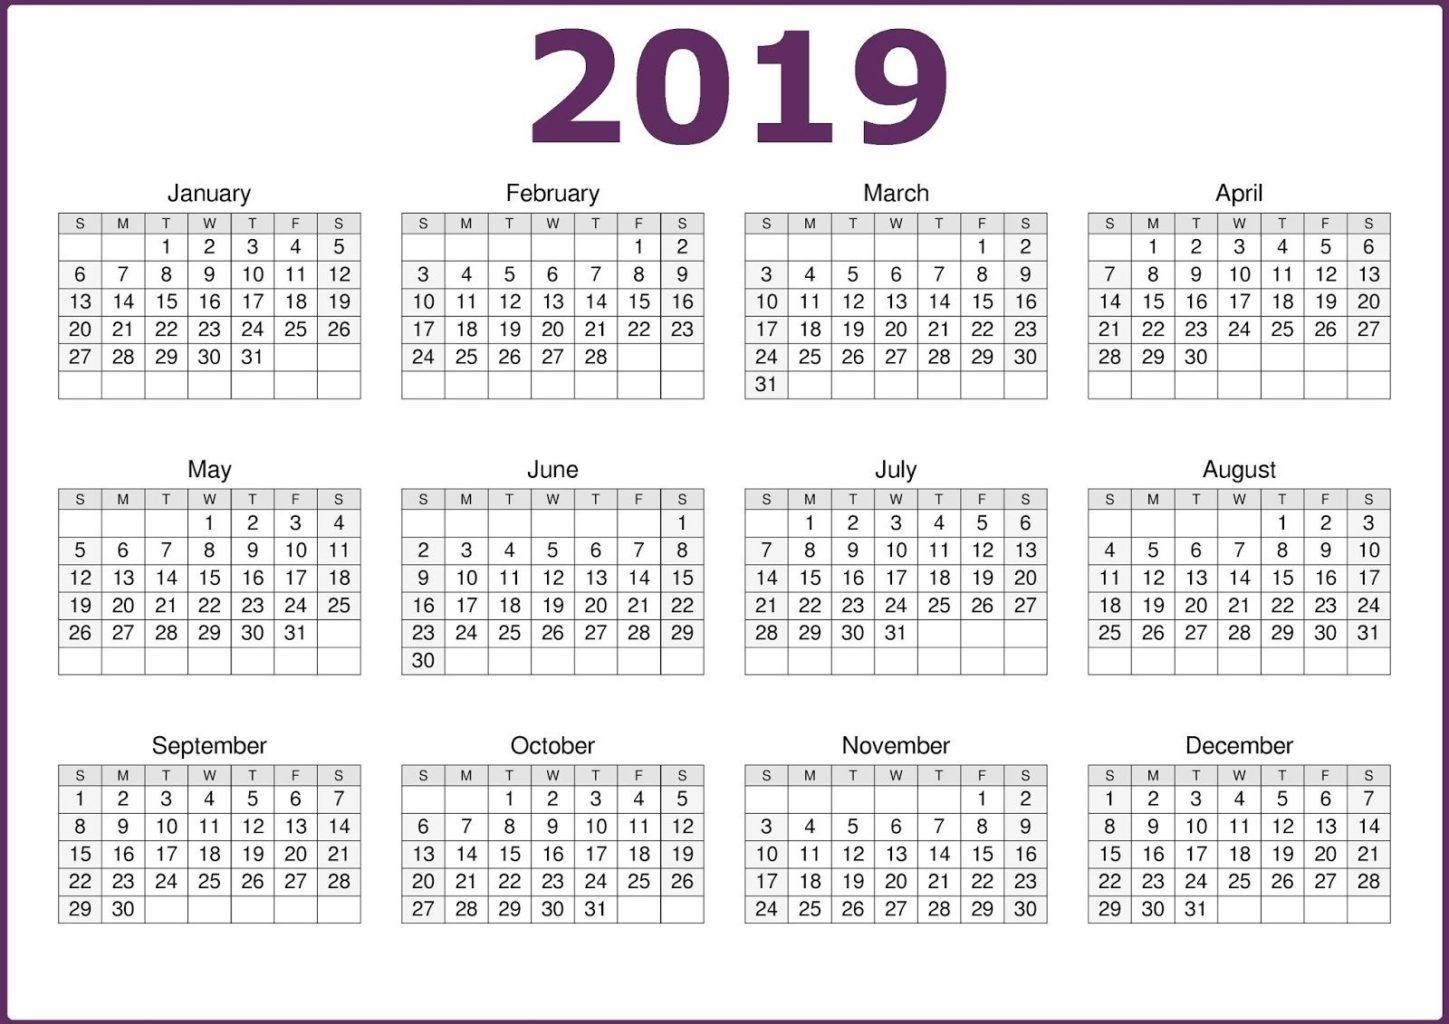 2019 One Page Calendar Printable | 2019 Calendars | Calendar 2019 intended for 12 Month One Page Calendar